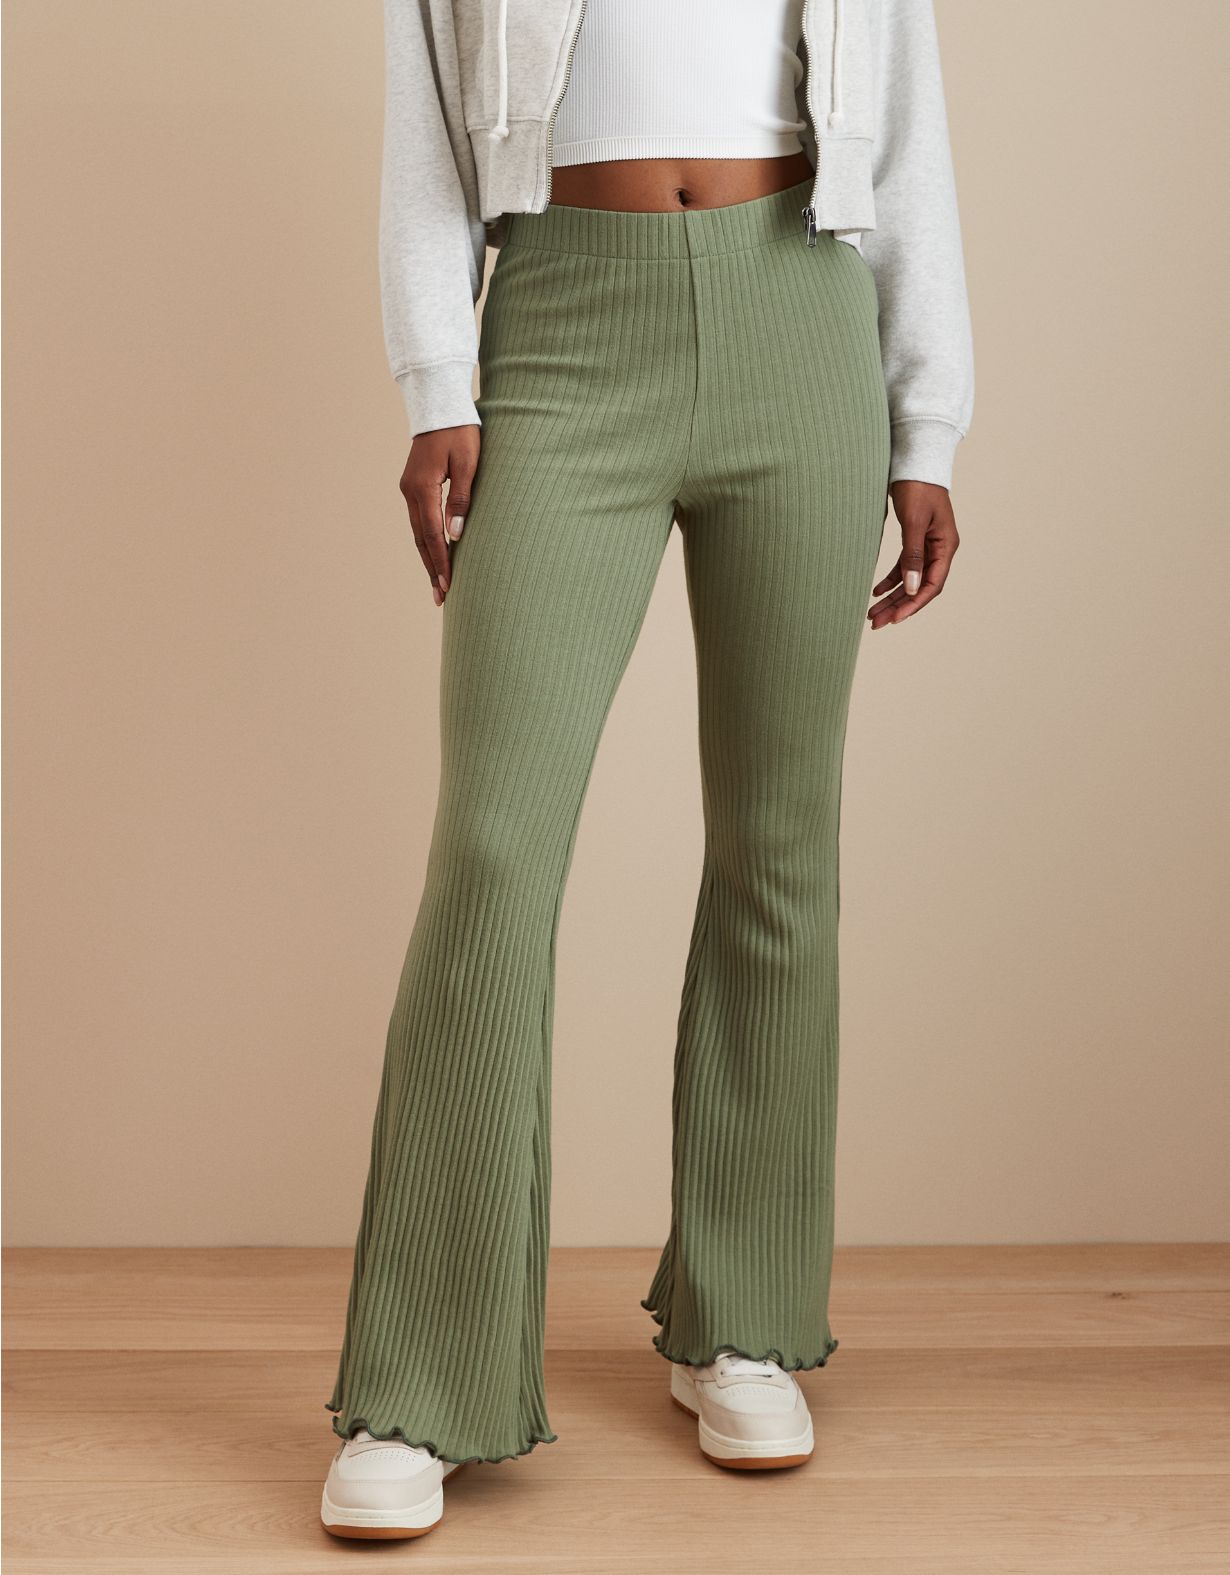 AE Super High-Waisted Space-Dye Flare Pant